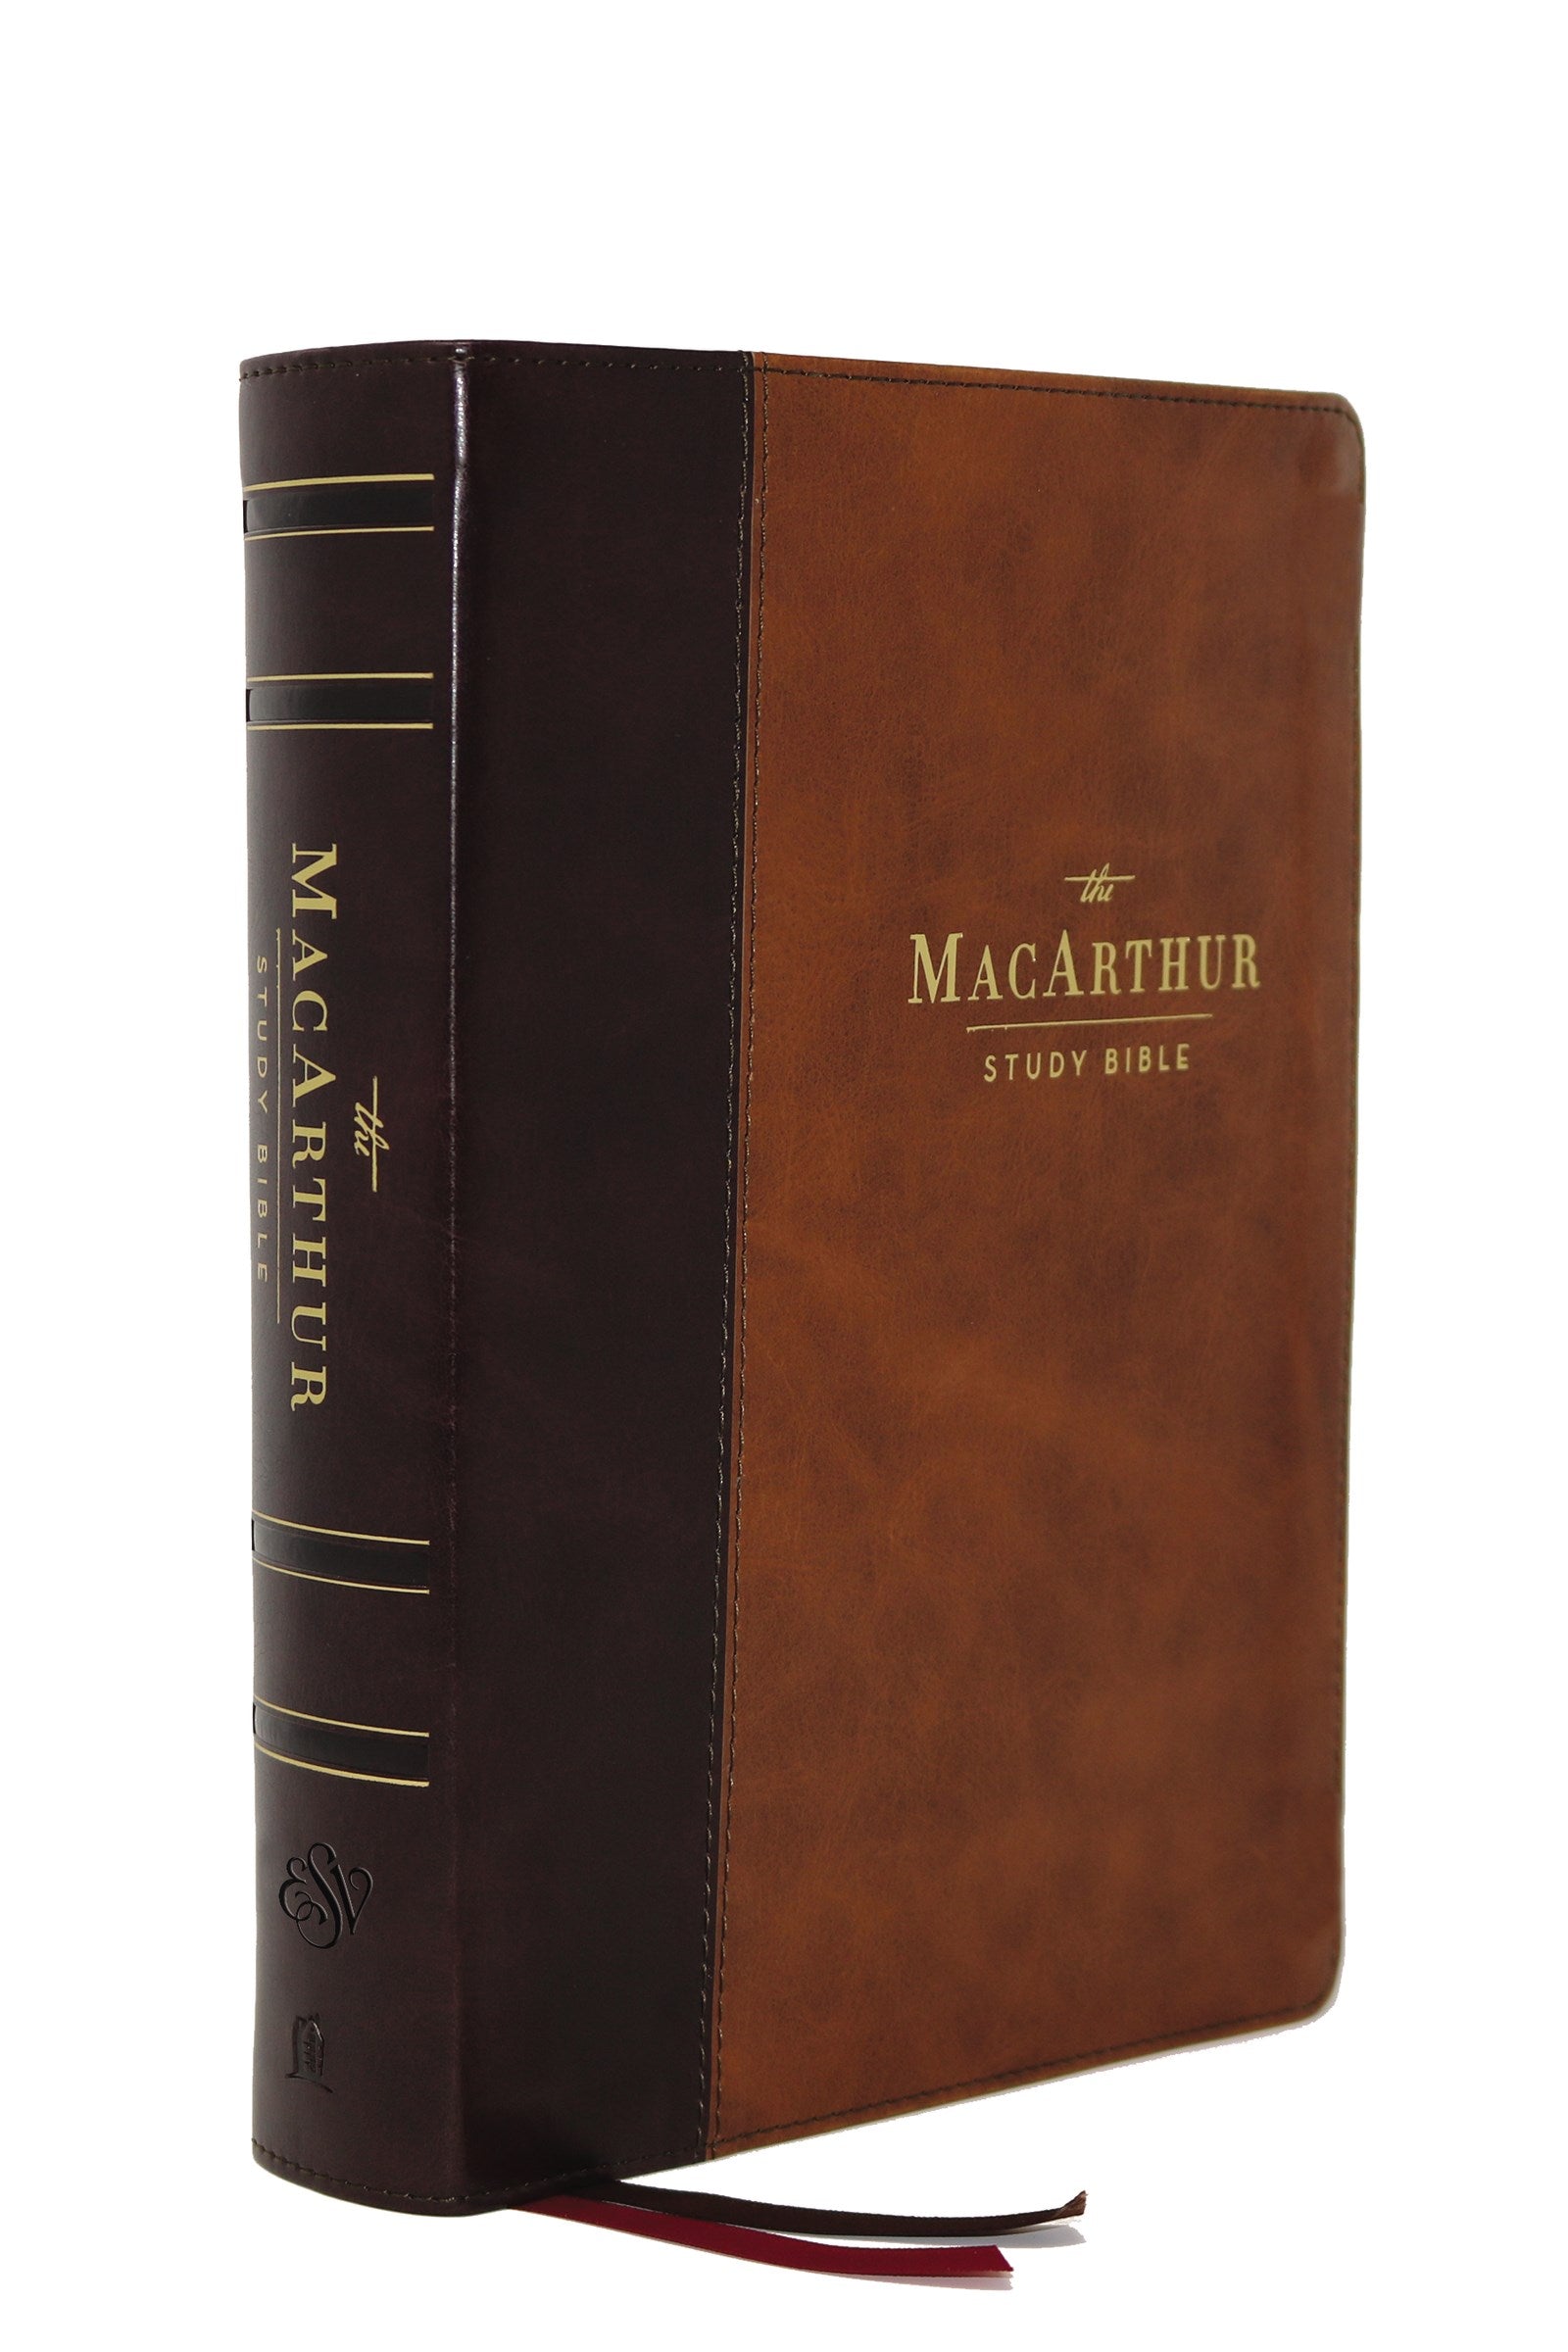 Seed of Abraham Christian Bookstore - (In)Courage - ESV MacArthur Study Bible (2nd Edition)-Brown Leathersoft